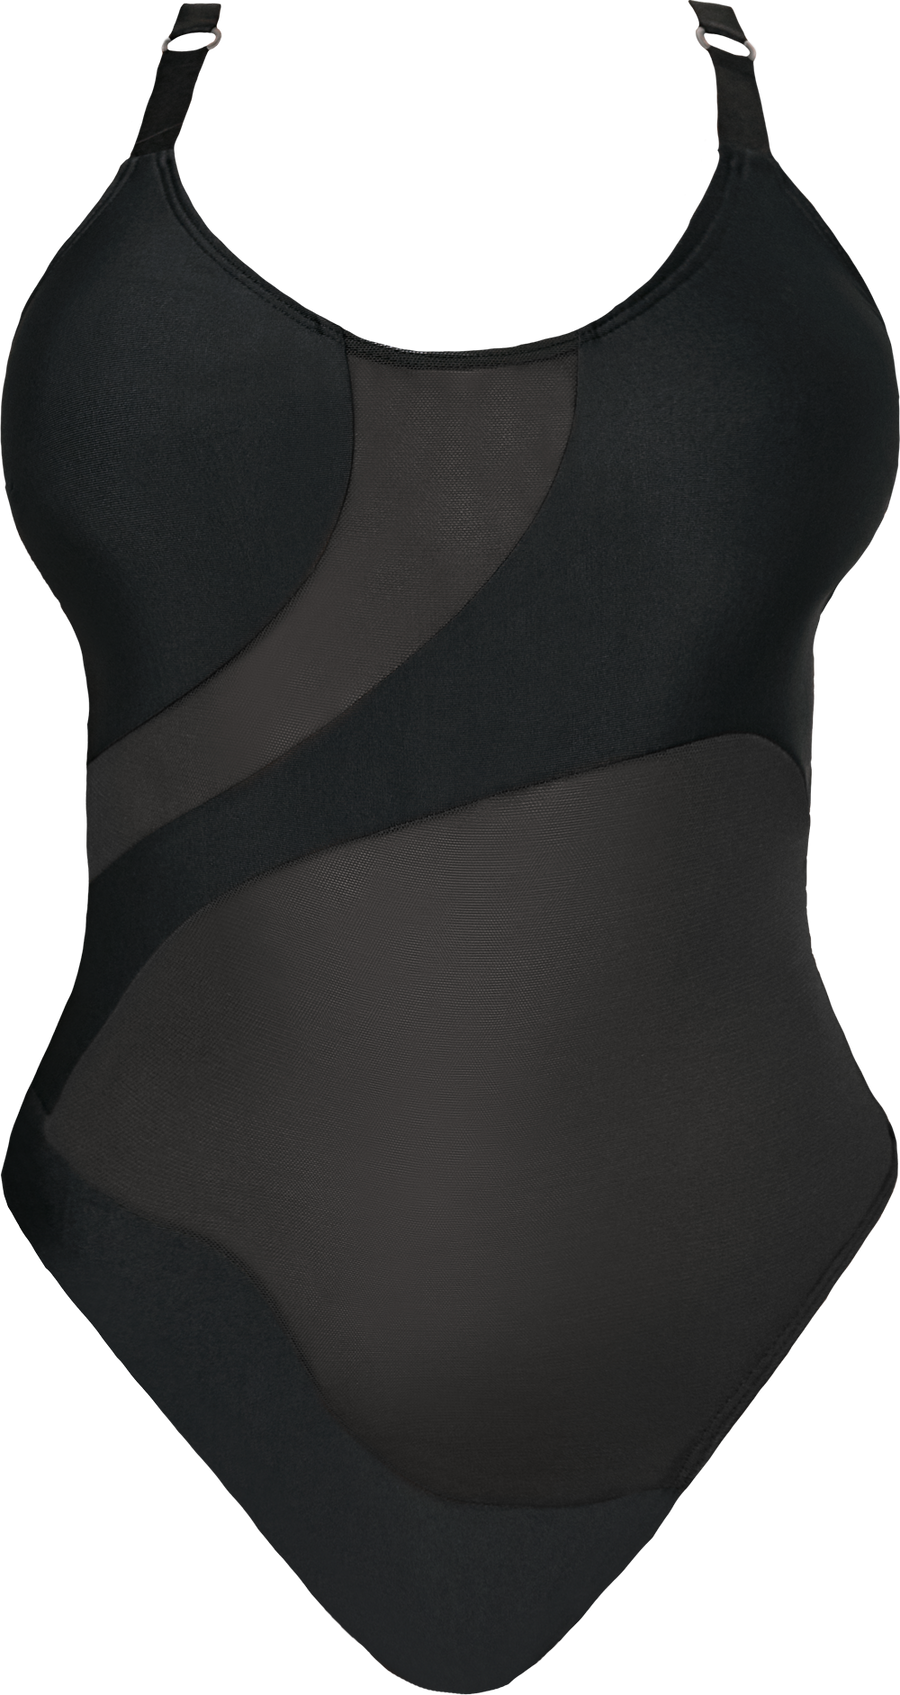 Silhouette One-Piece Body Suit Black with Black